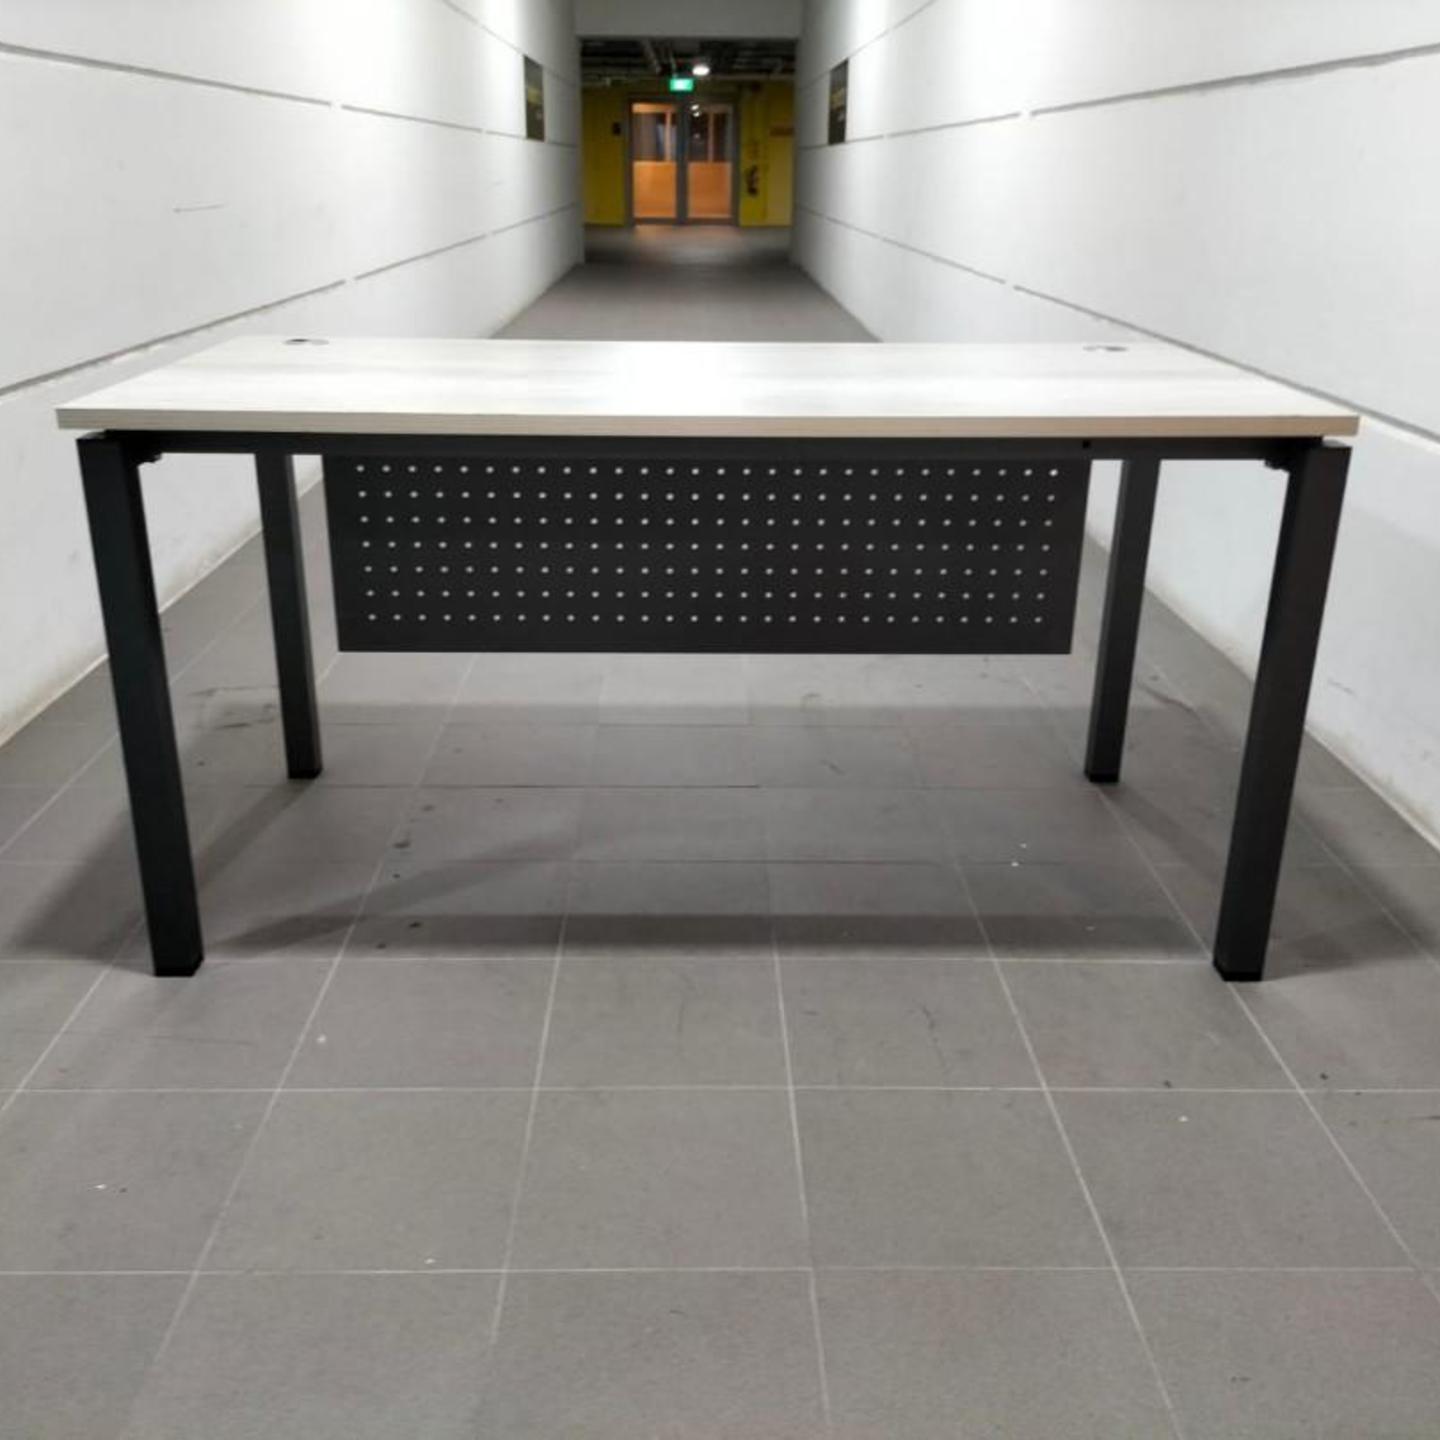 MAKURA Office Working Table in ASH and Dark Grey Frame